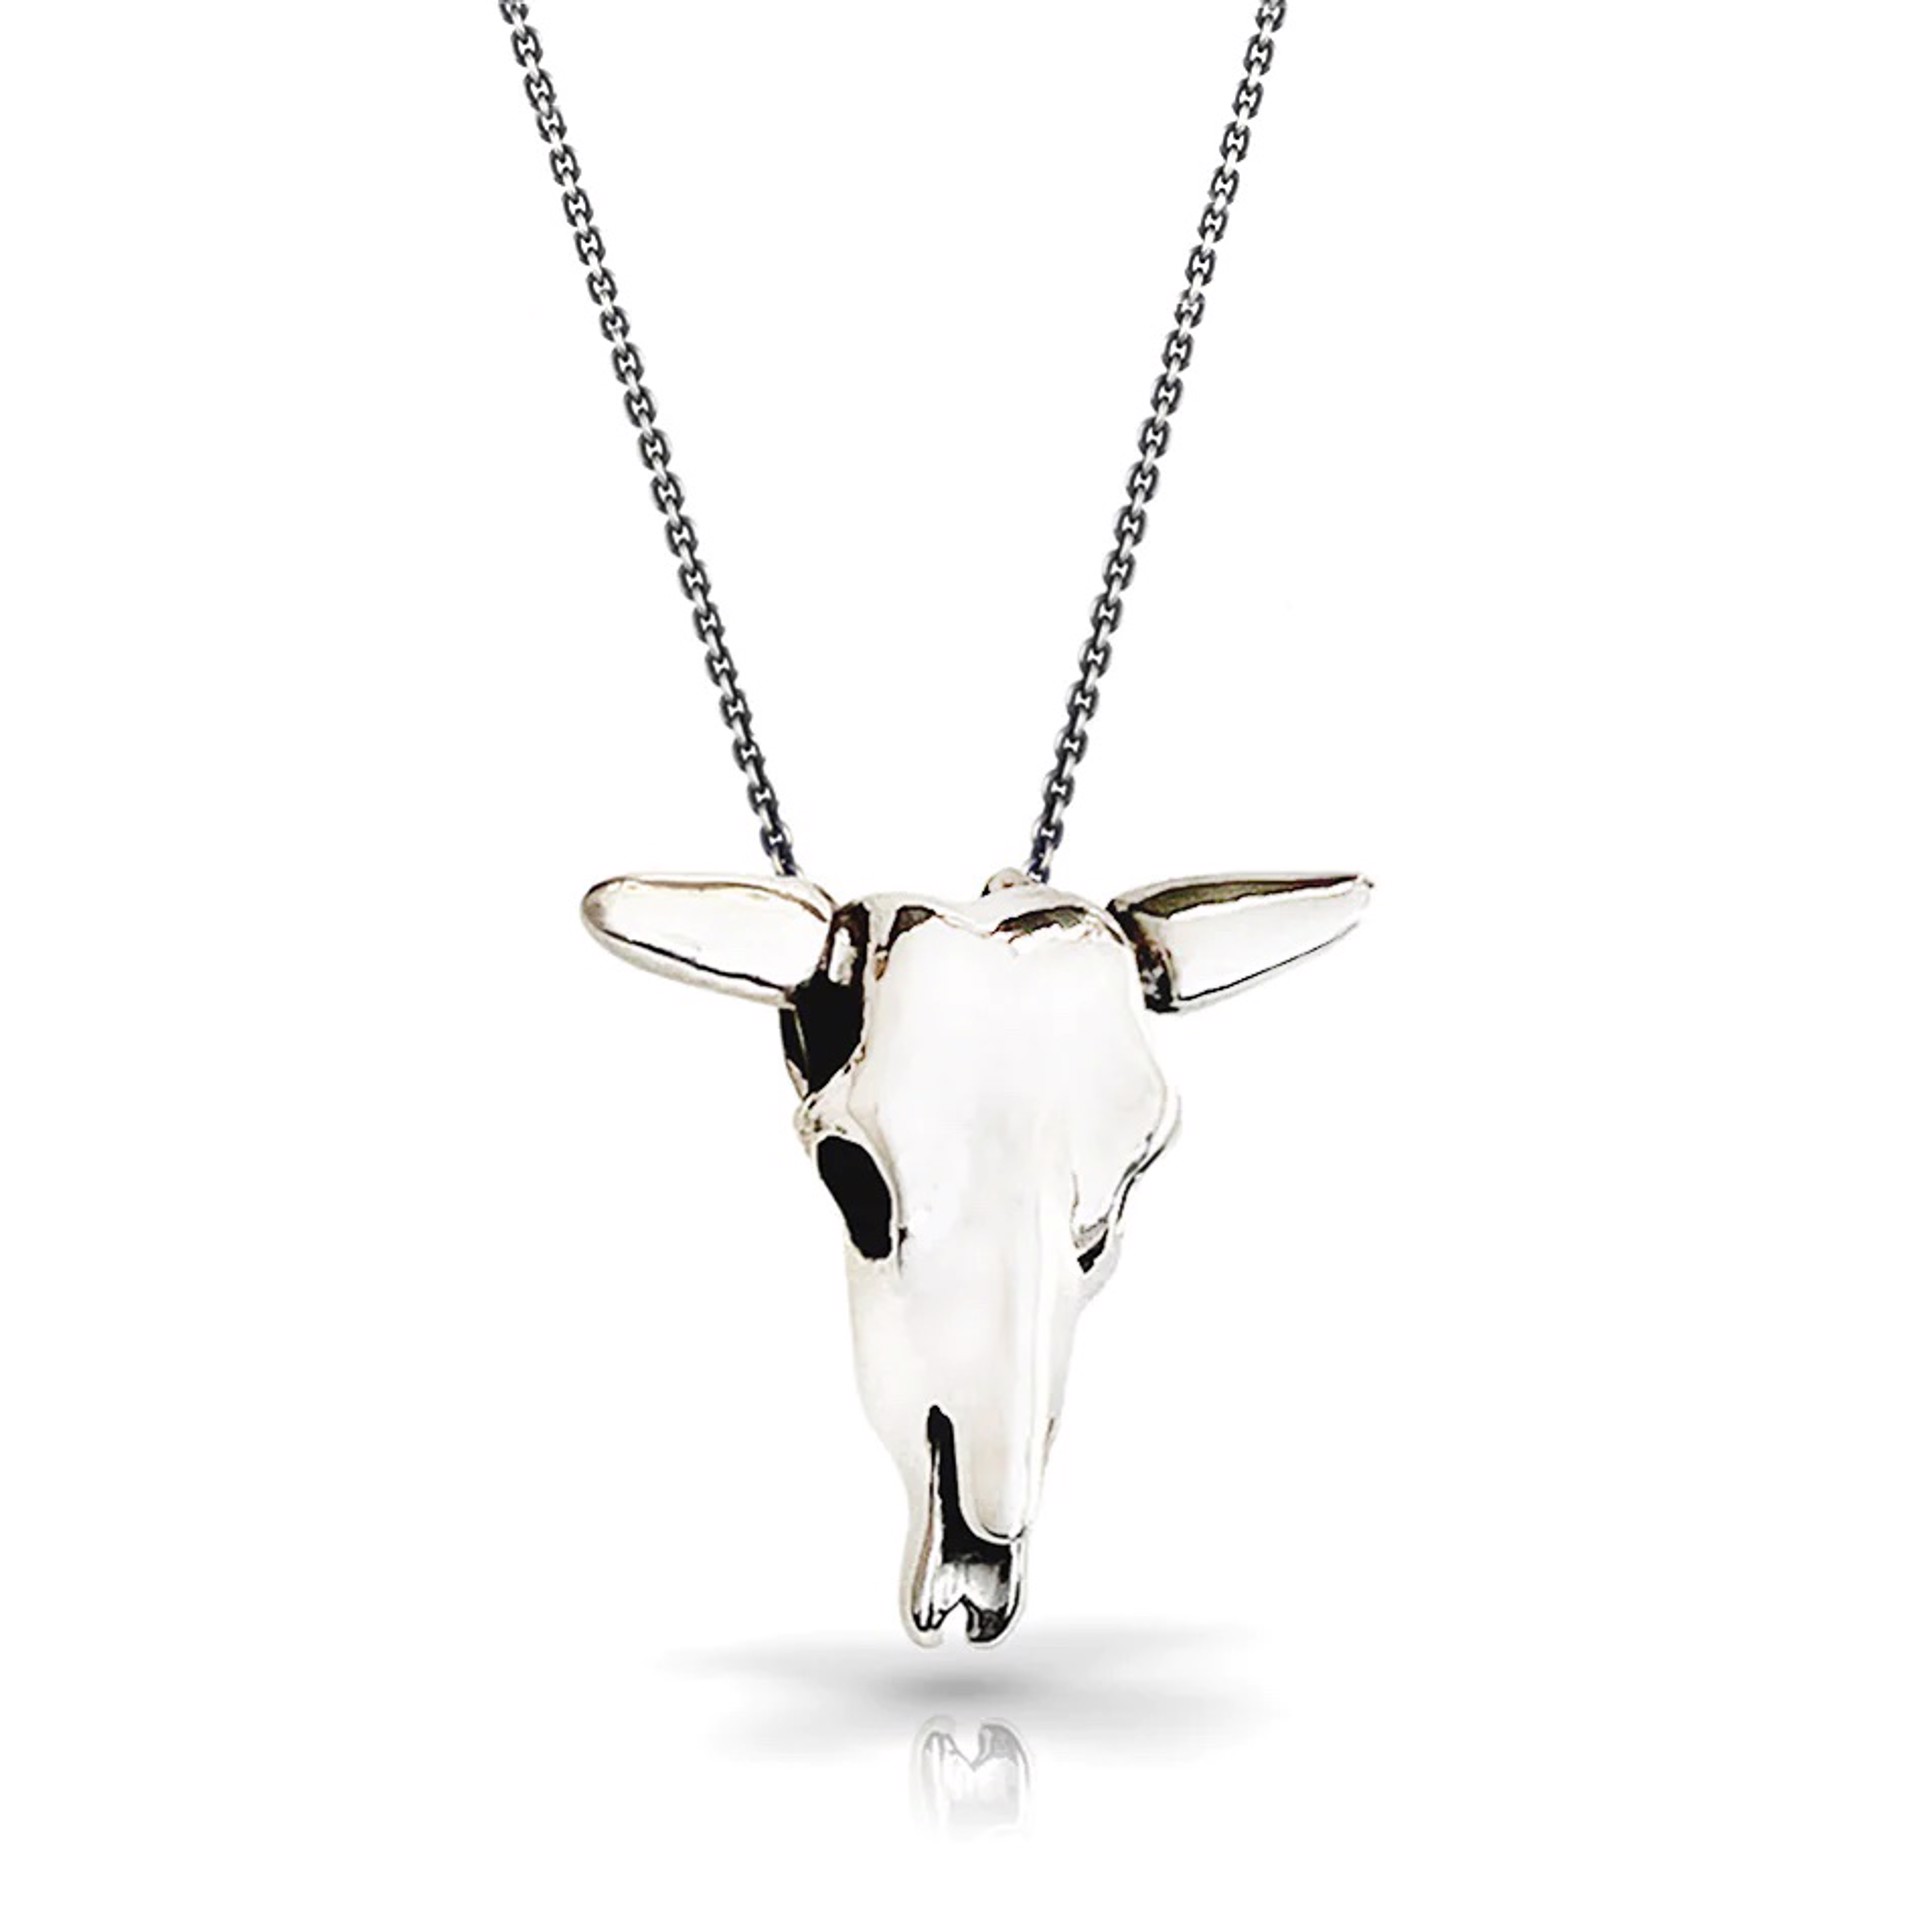 Petite Silver Cow Skull Necklace - High Polish Silver by Louisa Berky